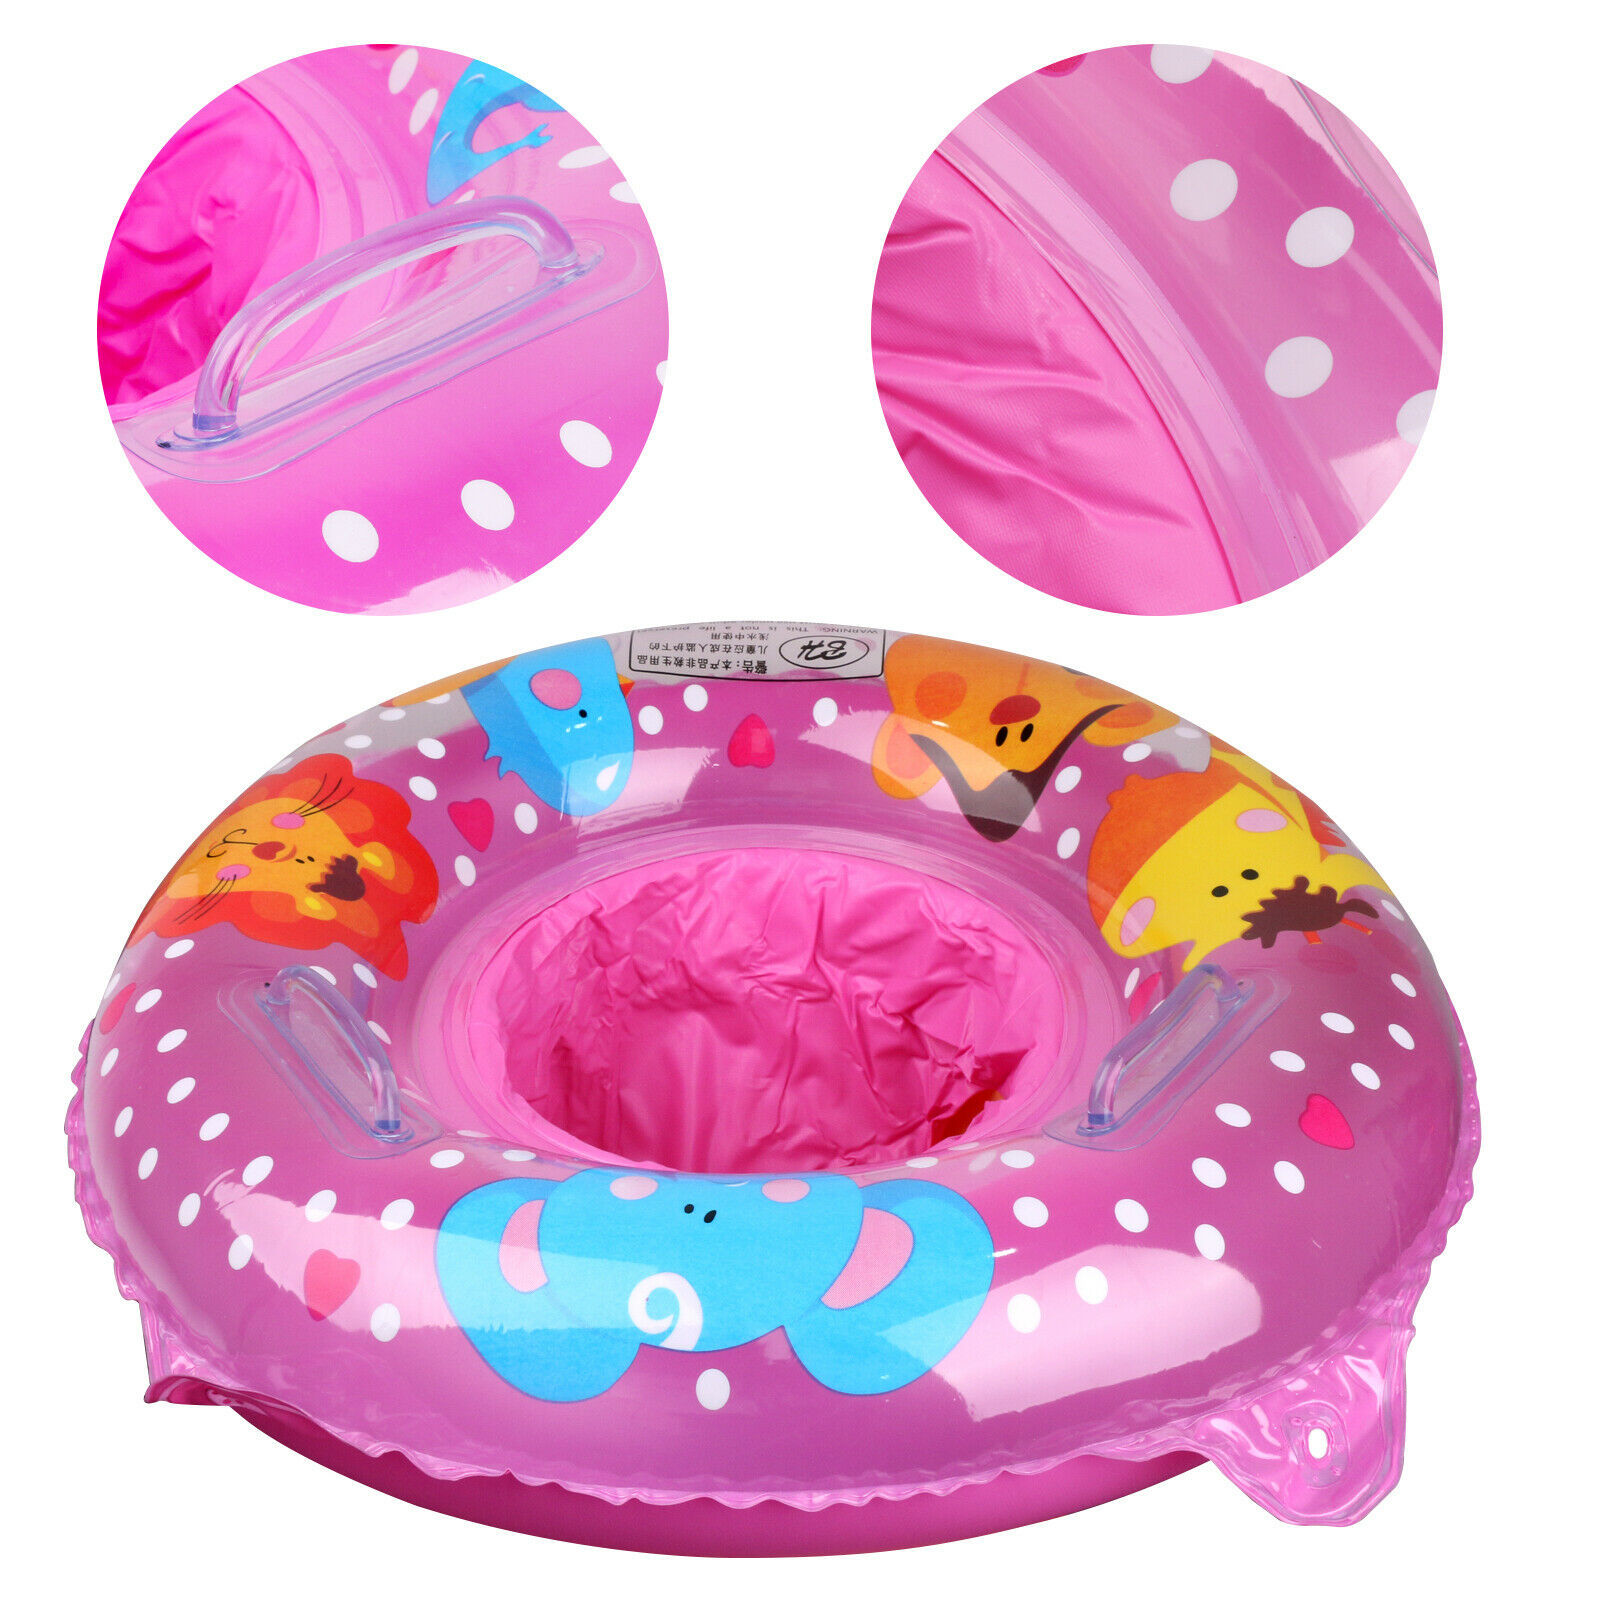 Inflatable Swim Ring 4 Sizes Fun Rainbow Color Swimming Pool Float Raft Life Ring Lifeguard for Children/Adults Safety Preserver Decor Boat